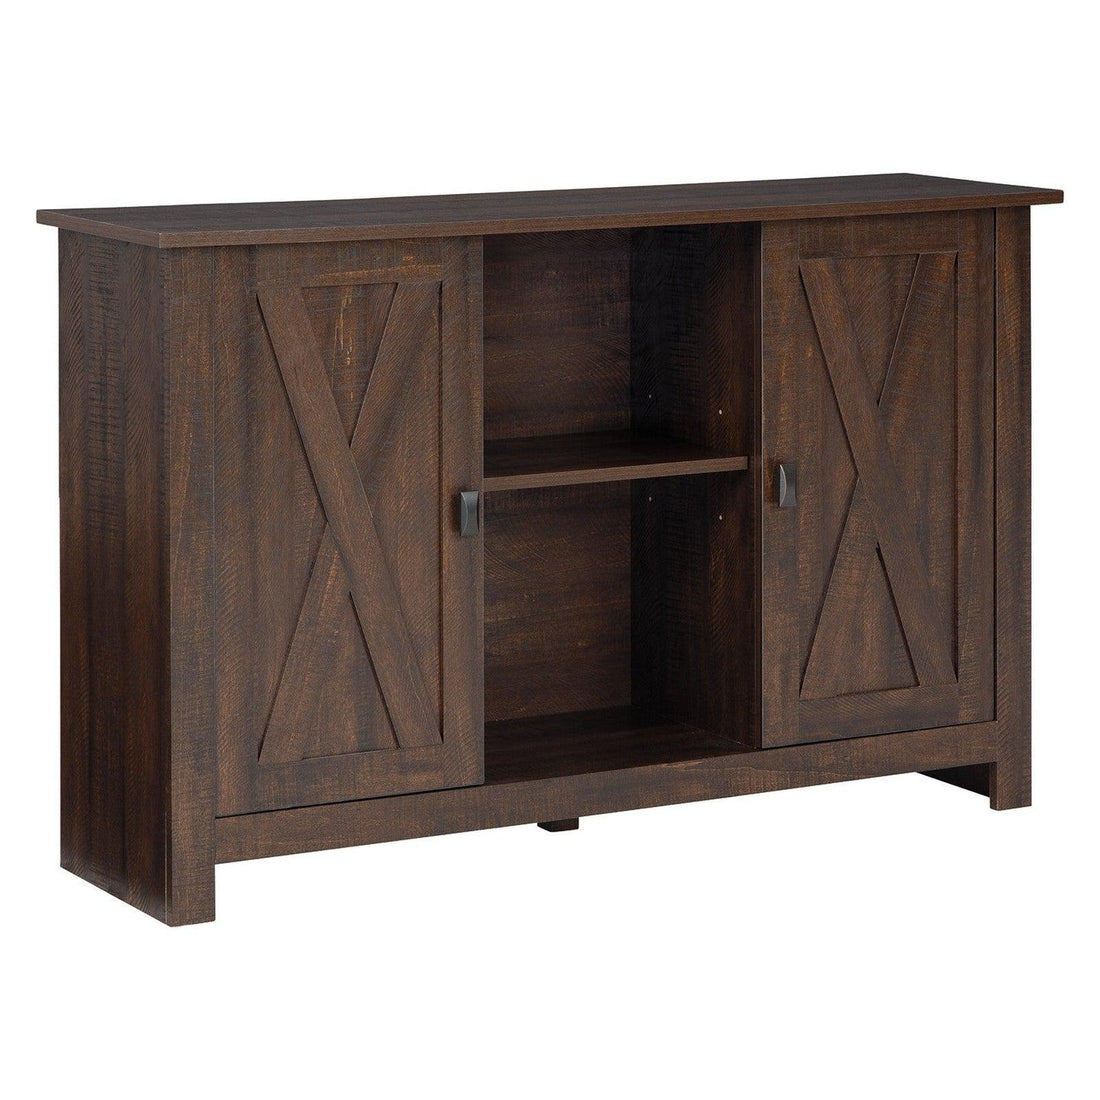 Turnley Accent Cabinet Ash-A4000327